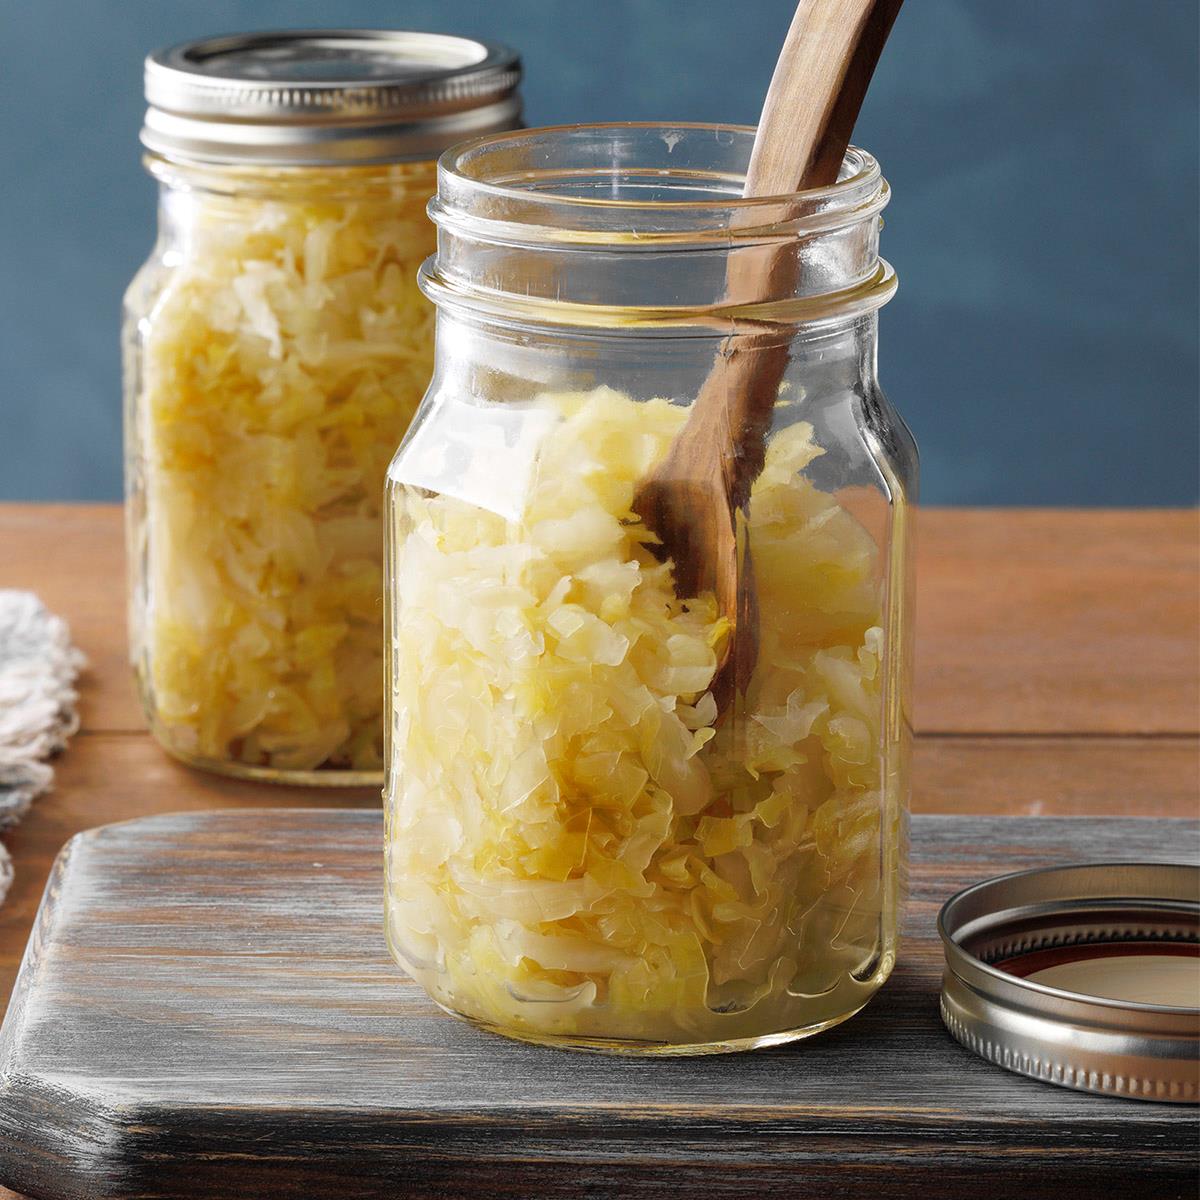 BREAKING NEWS - Centuries old process critical to baseball classic - Hot Dogs with Sauerkraut!